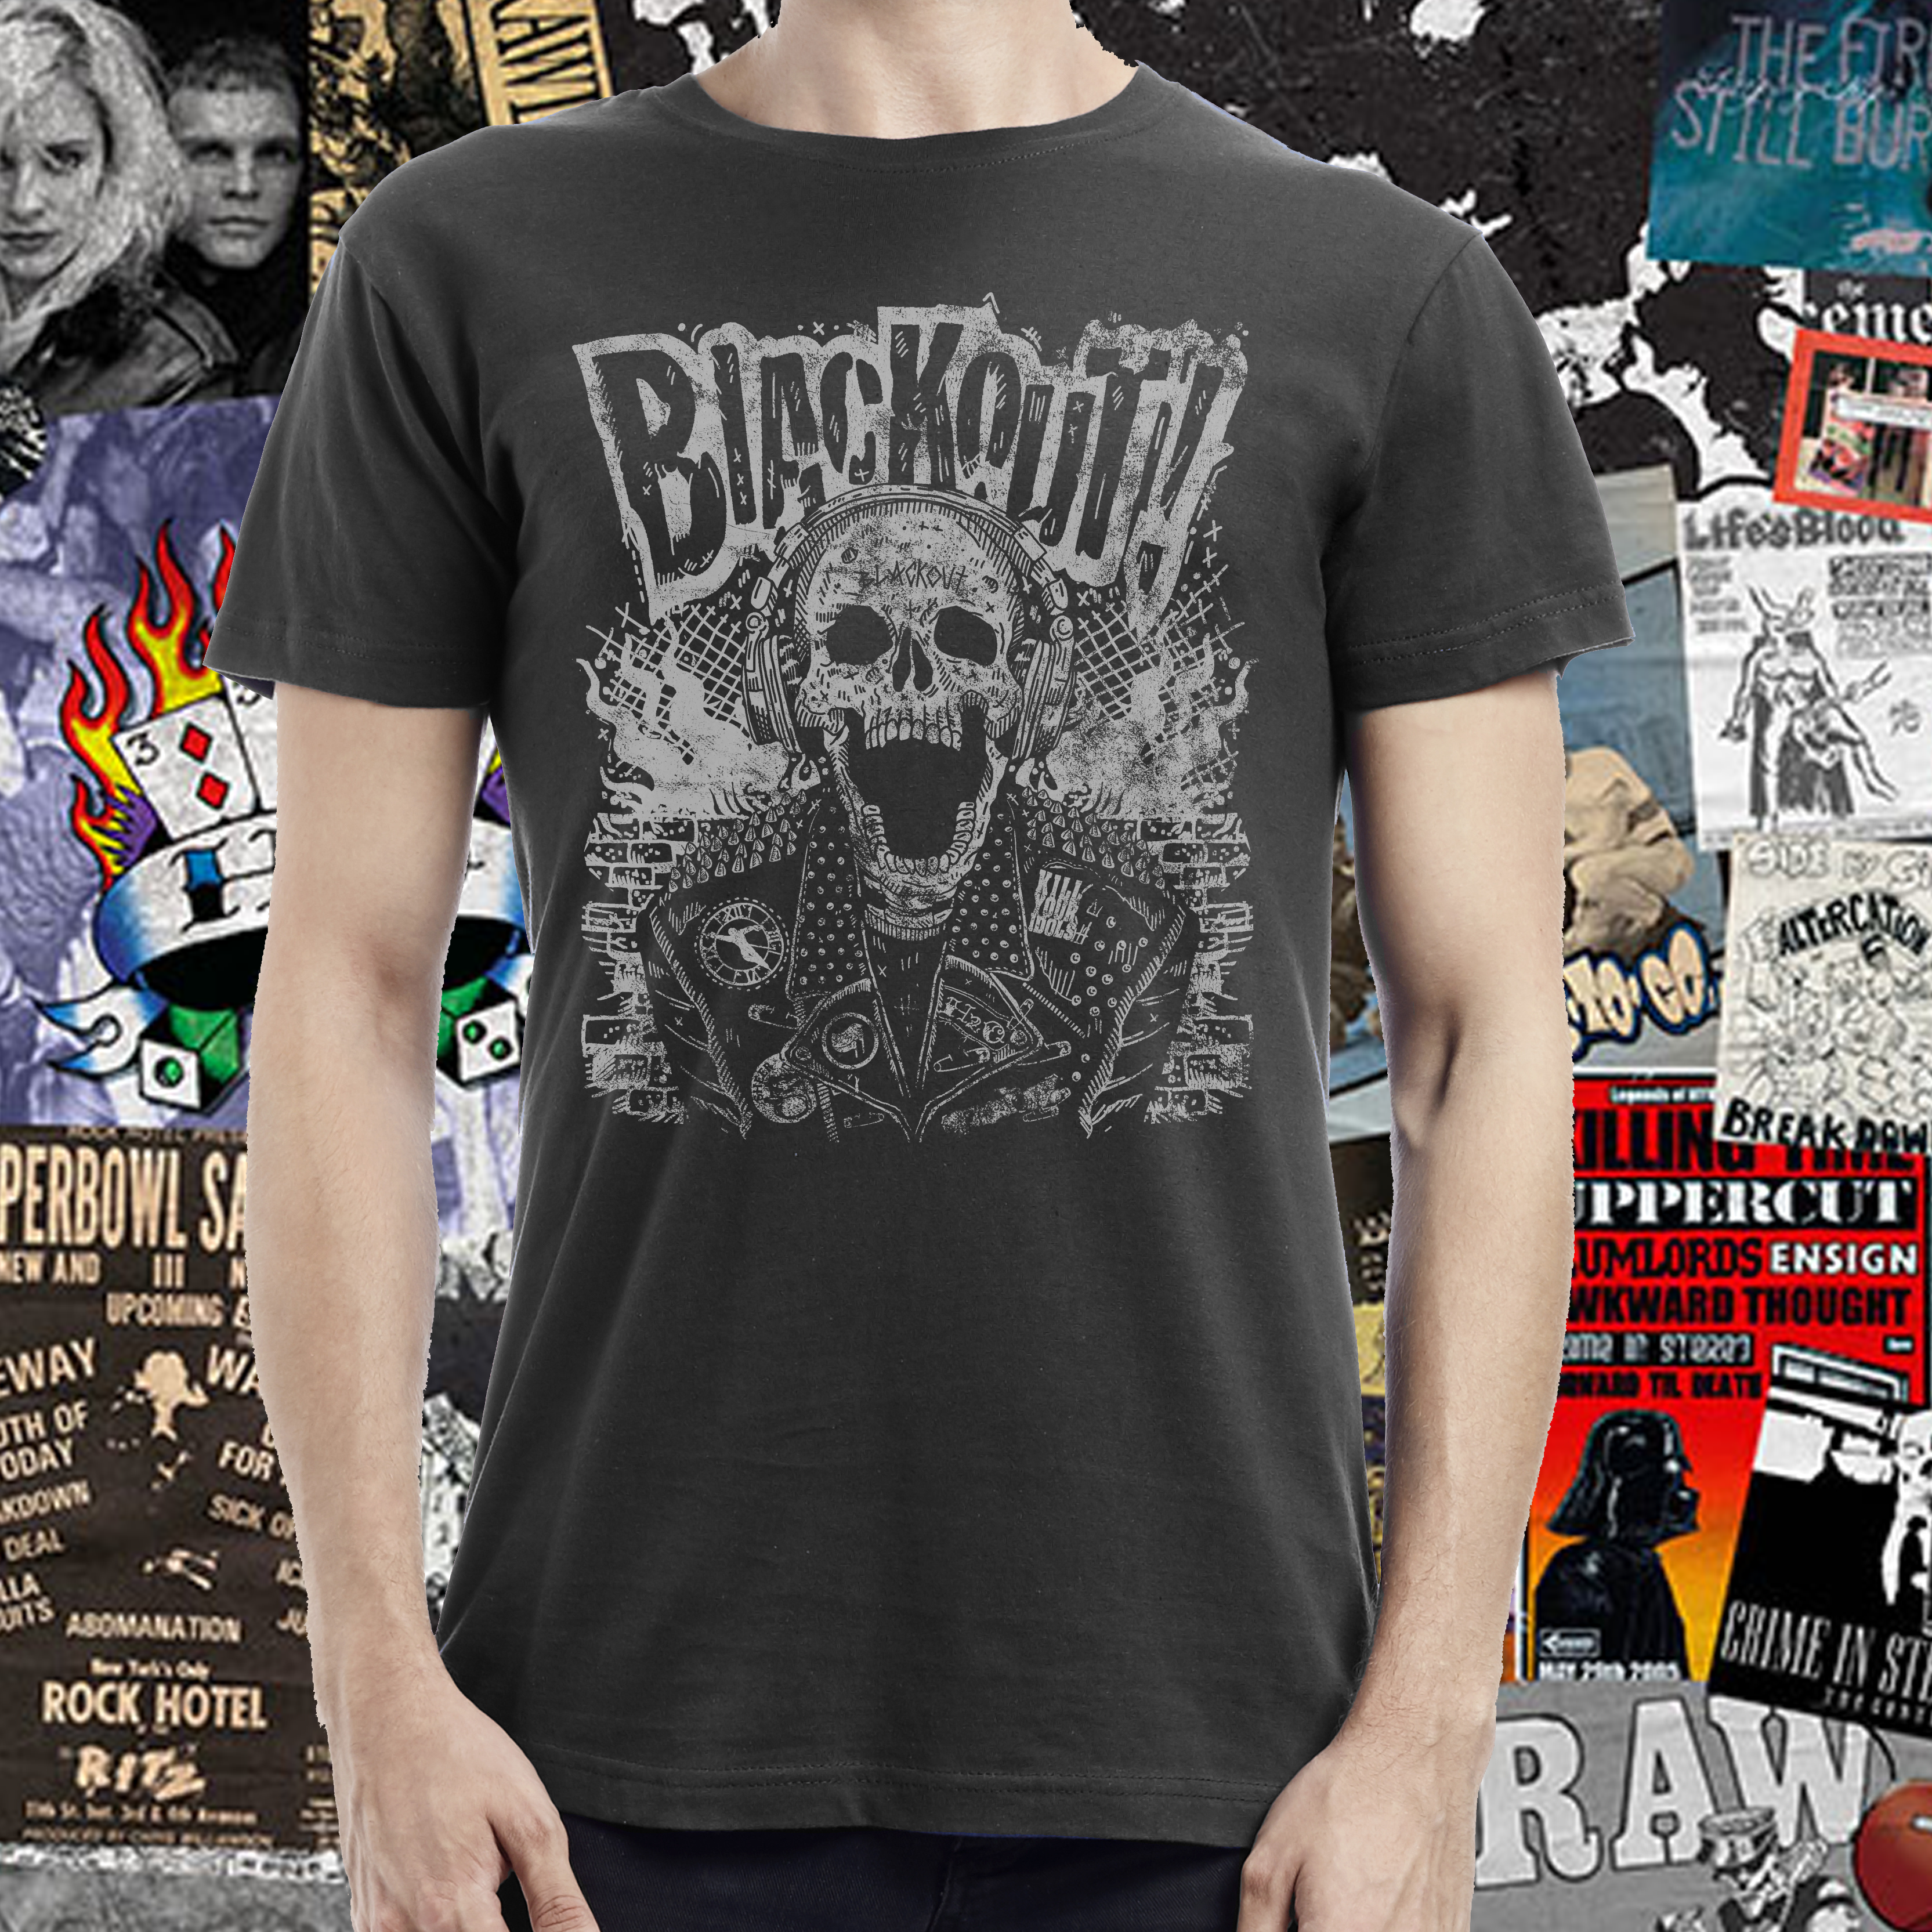 Blackout! Records Label Tee